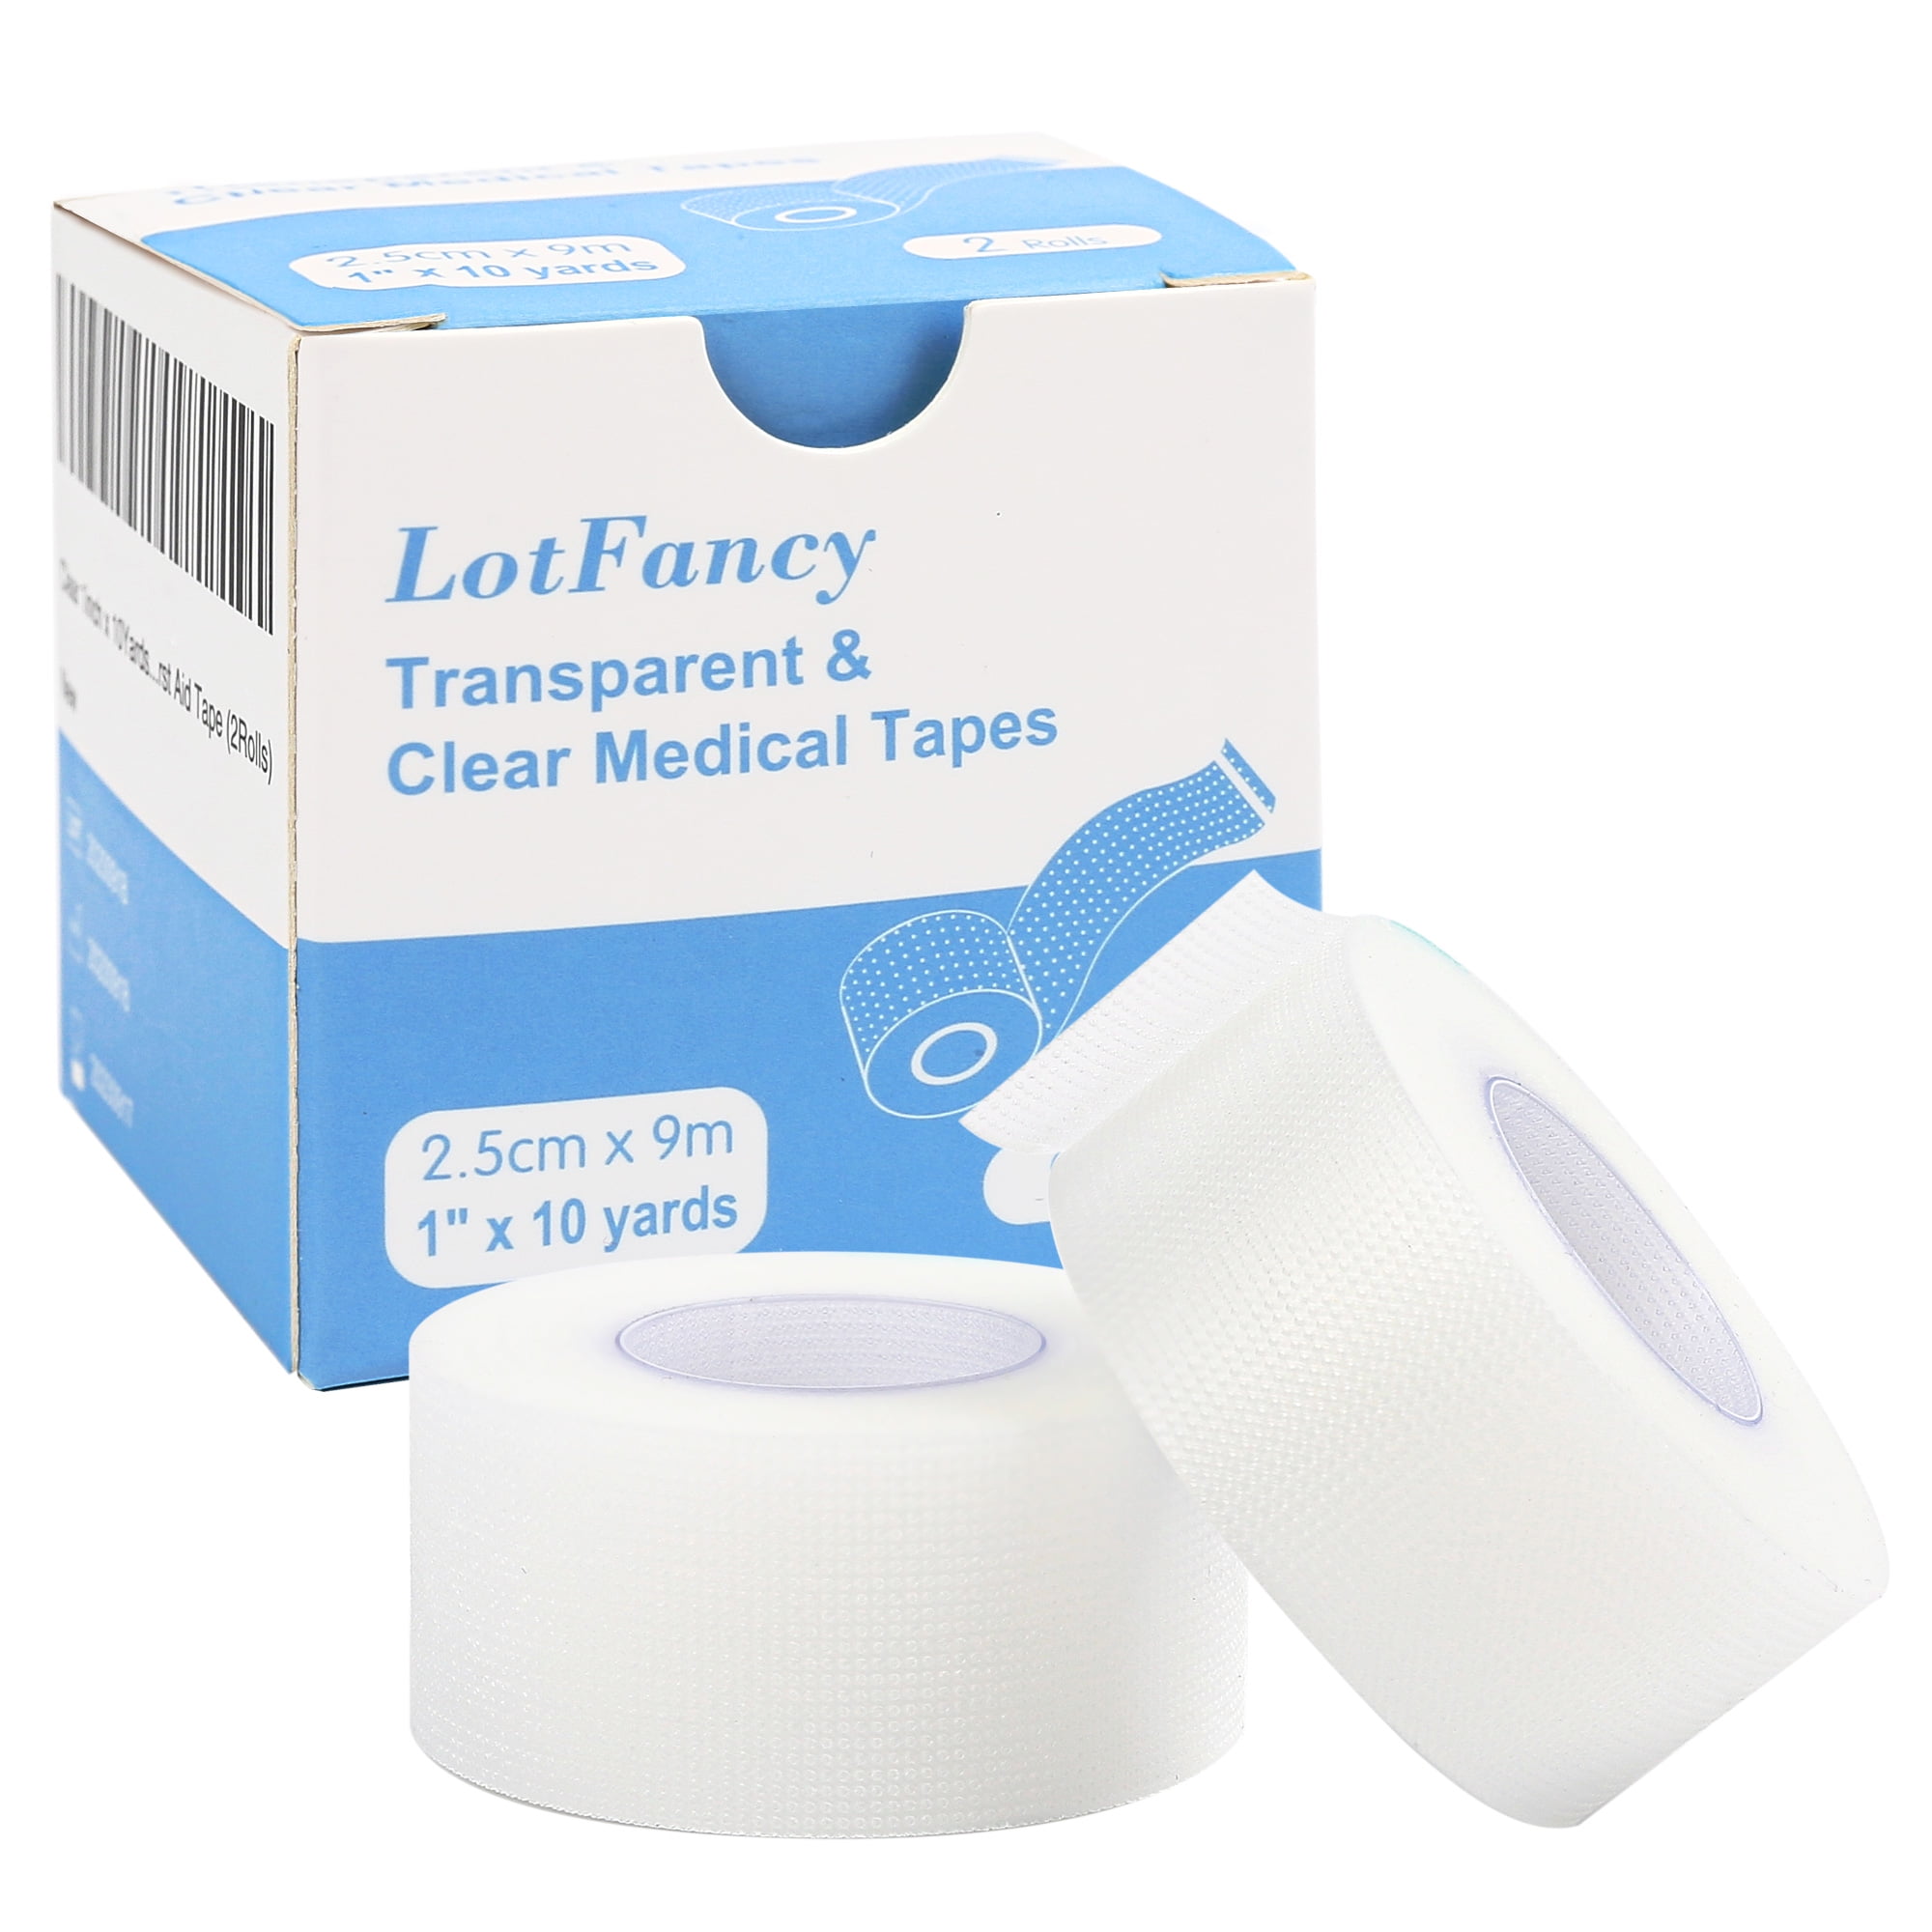  LotFancy Transparent Medical Tape, 6Rolls 2inch x 10Yards,  Adhesive Clear Hypoallergenic Surgical Tape, PE First Aid Tape for Wound,  Bandage, Sensitive Skin, Latex Free : Health & Household